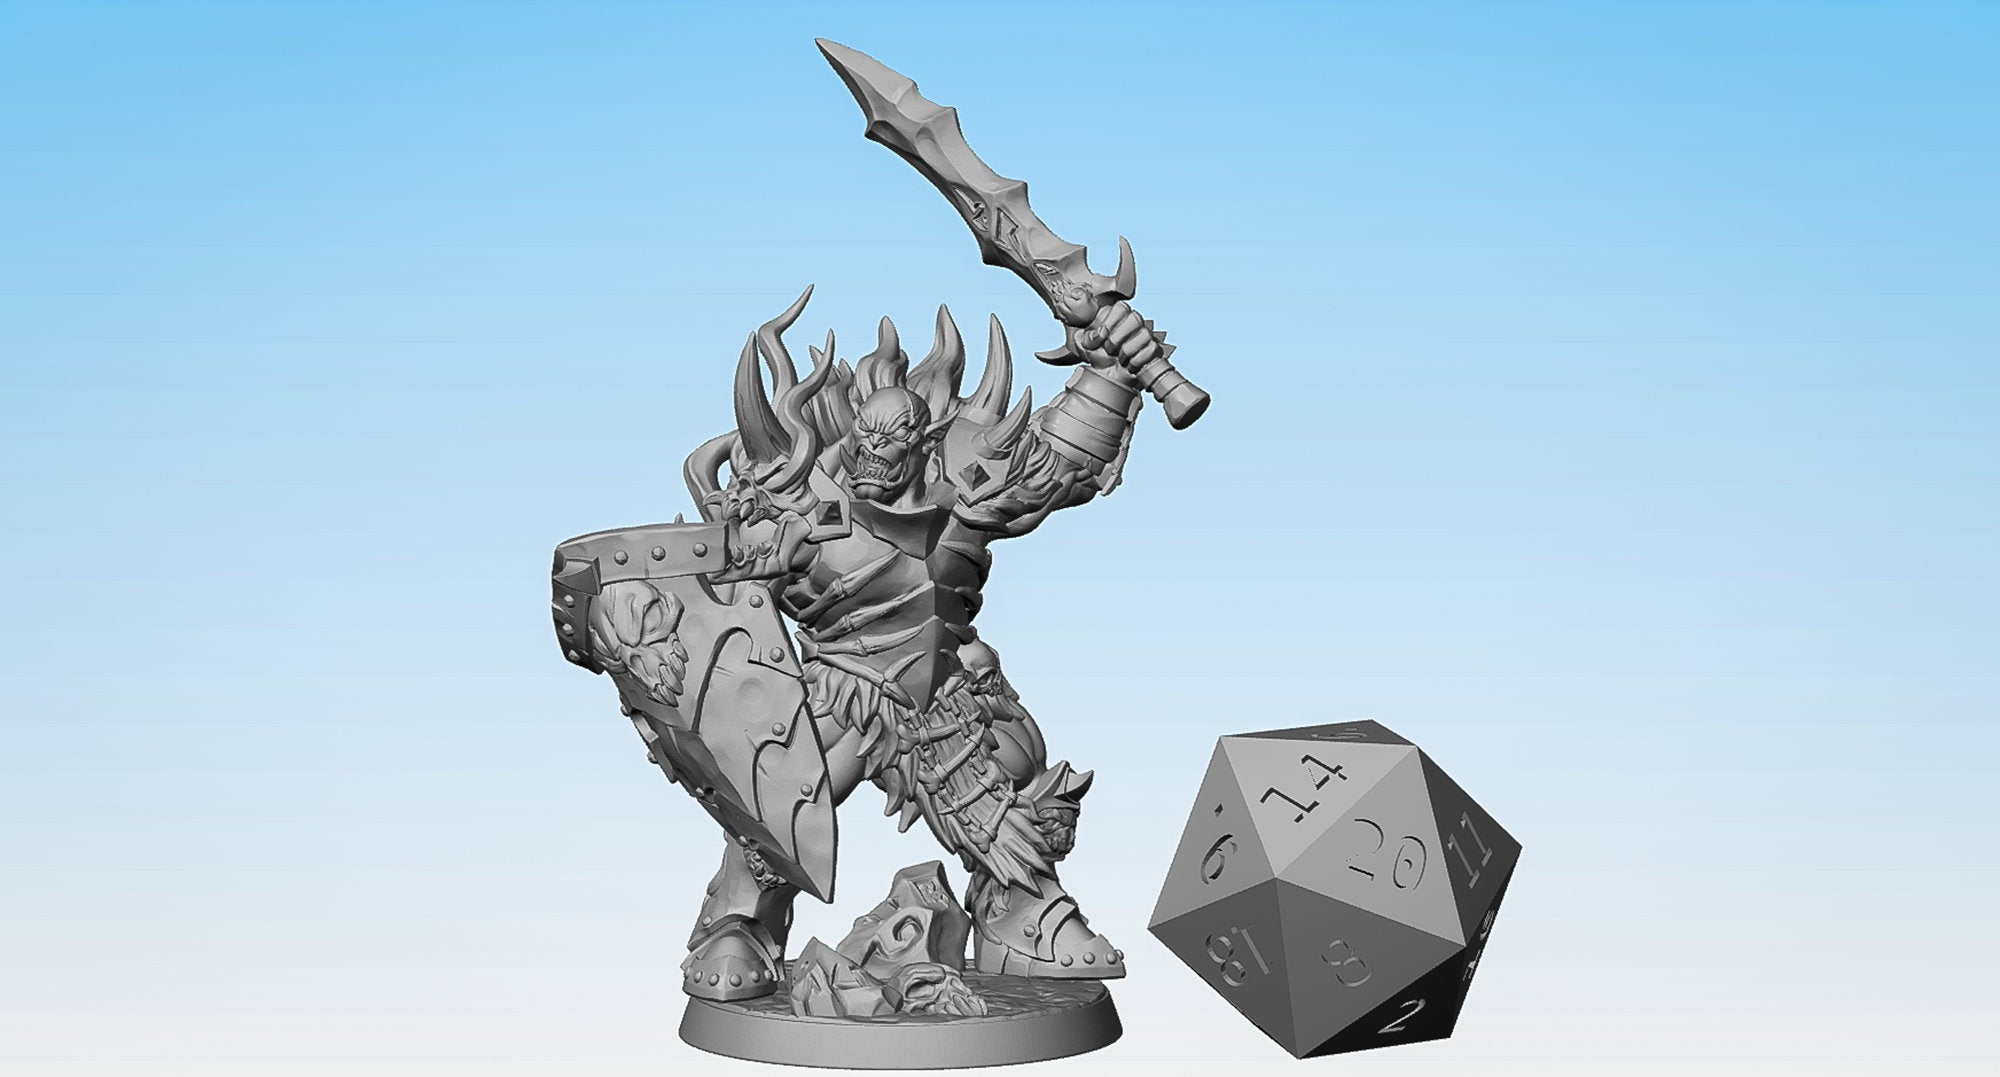 FROST ORC "B" "Warrior Sword & Shield" | Dungeons and Dragons | DnD | Pathfinder | Tabletop | RPG | Hero Size | 28 mm-Role Playing Miniatures